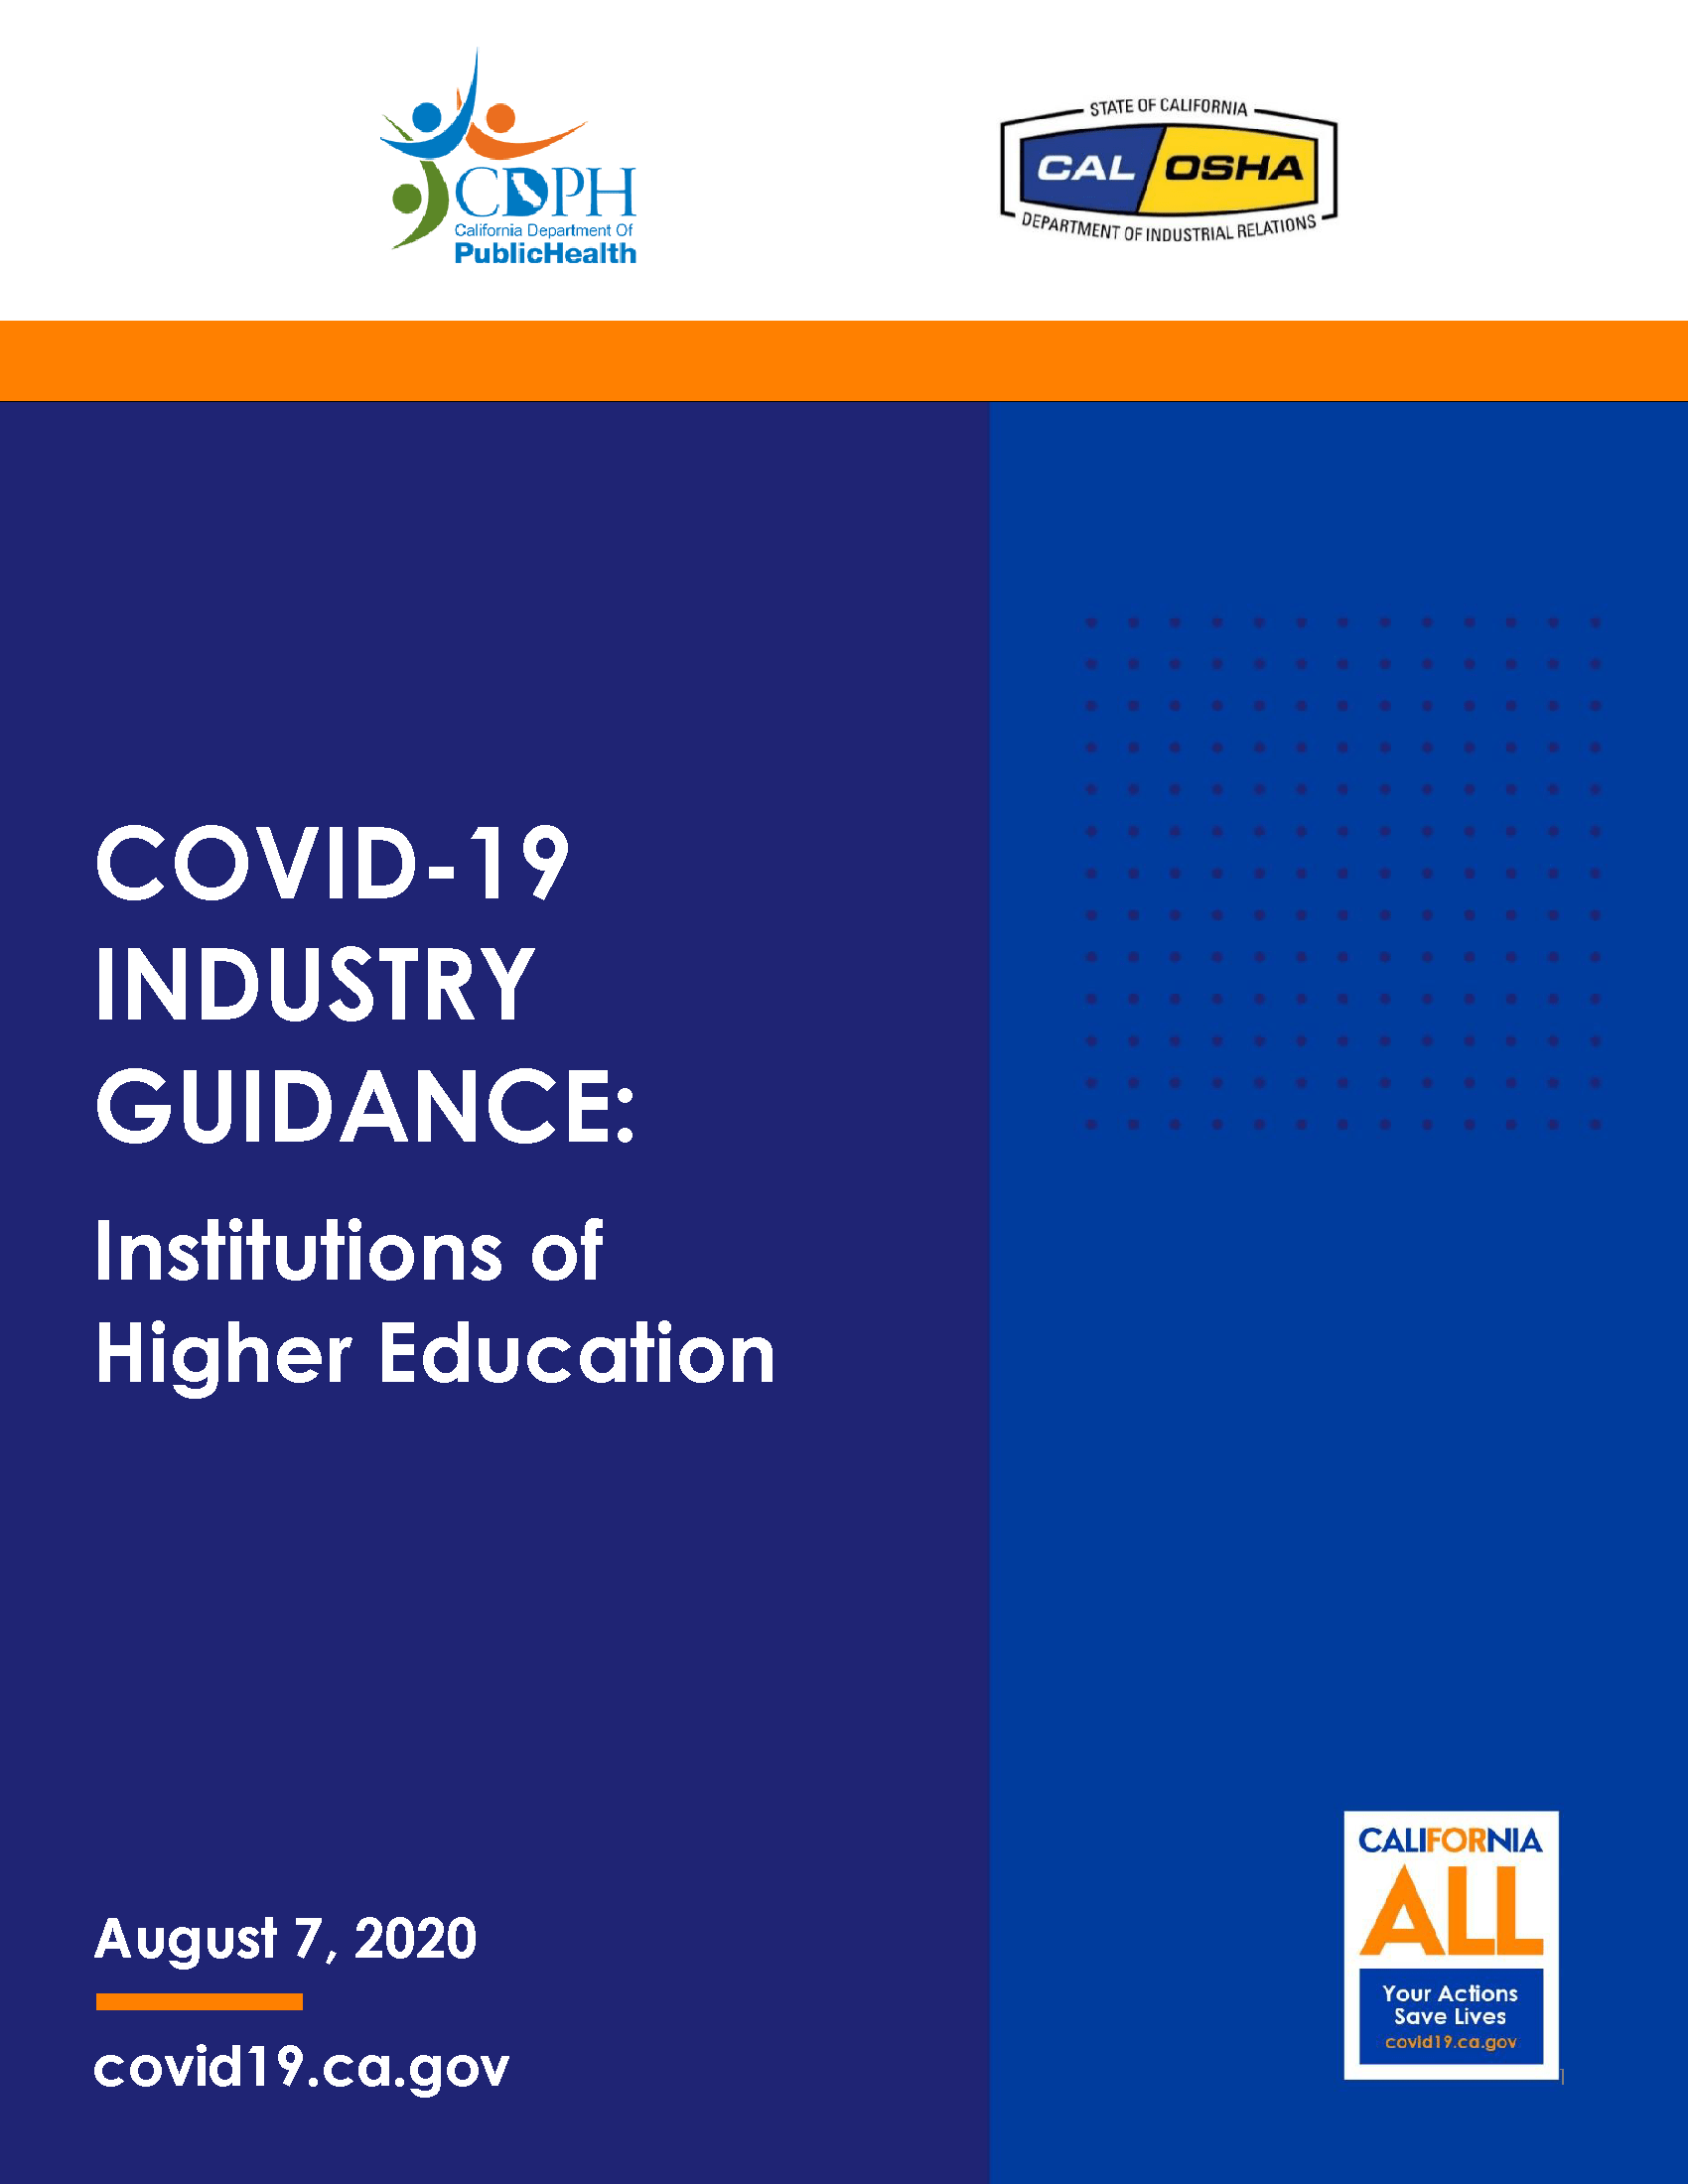 COVID-19 INDUSTRY GUIDANCE: Institutions of Higher Education